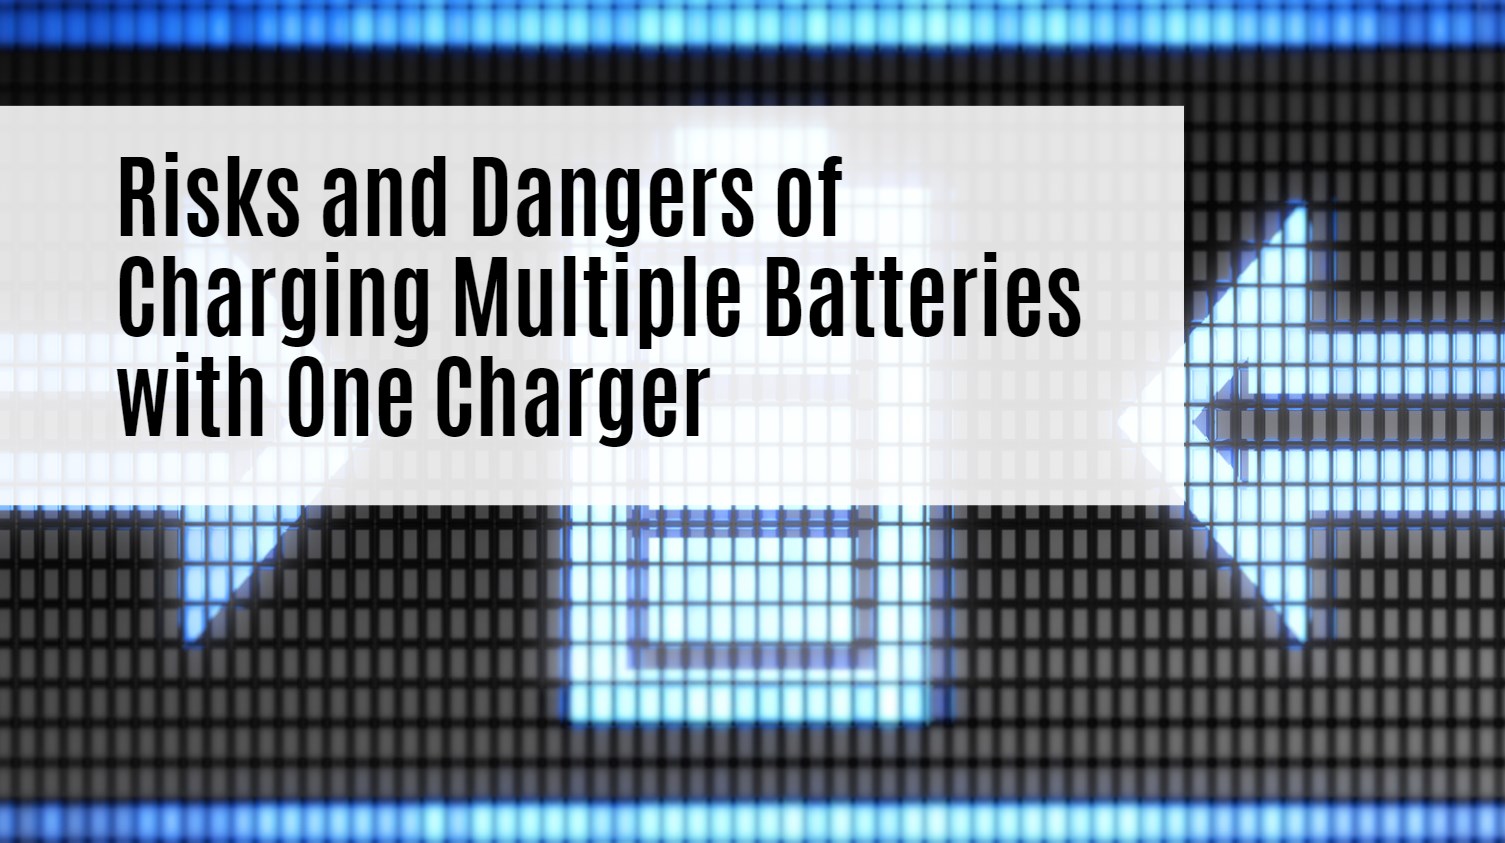 Risks and Dangers of Charging Multiple Batteries with One Charger